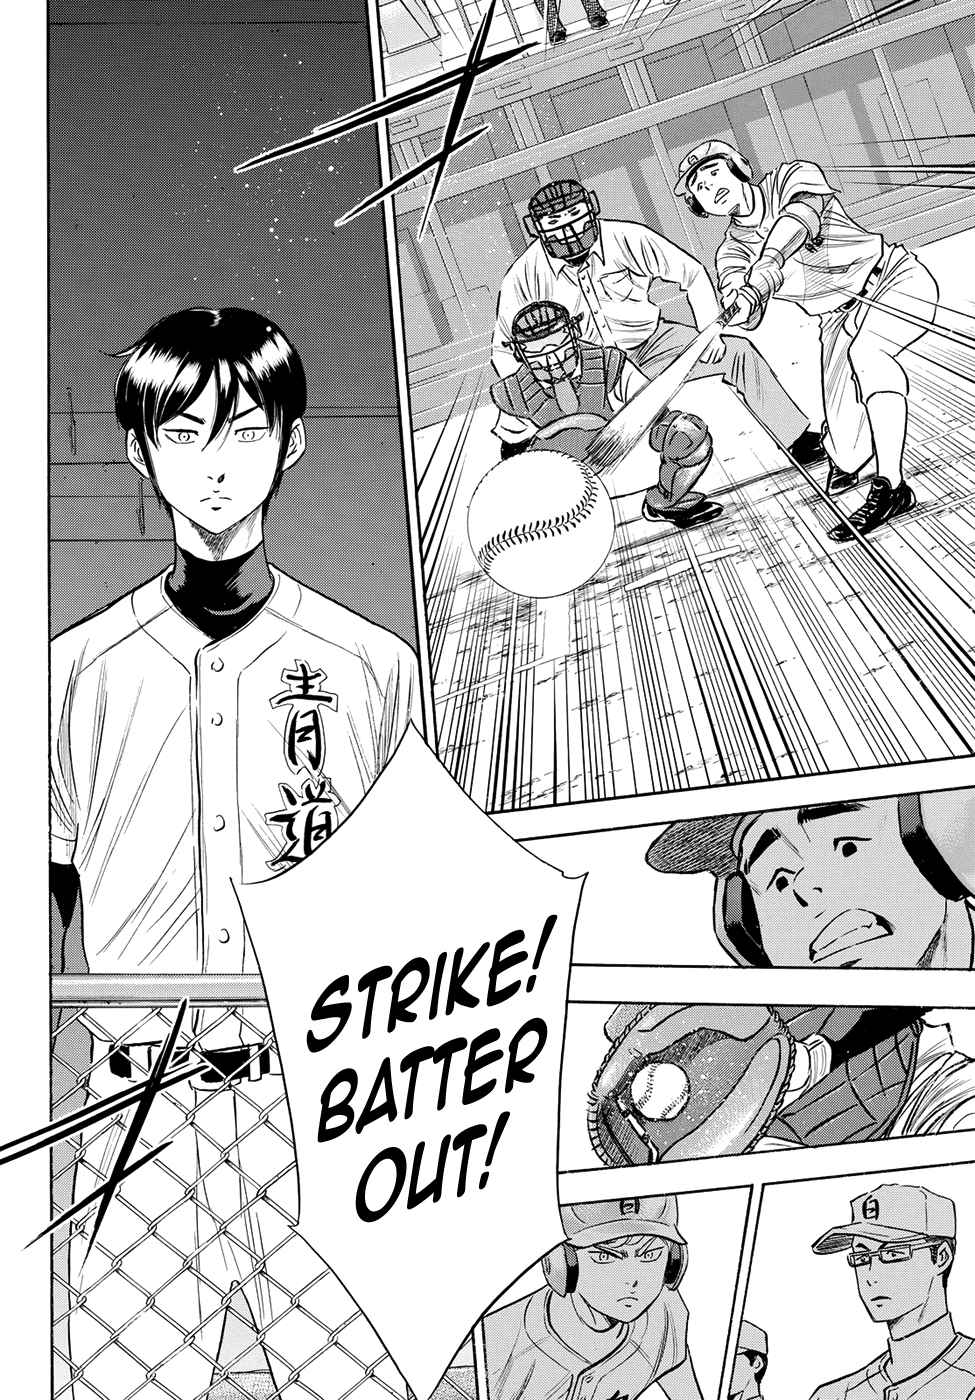 Diamond no Ace Act II Vol. 8 Ch. 73 Individual Strength and Shape of the Team